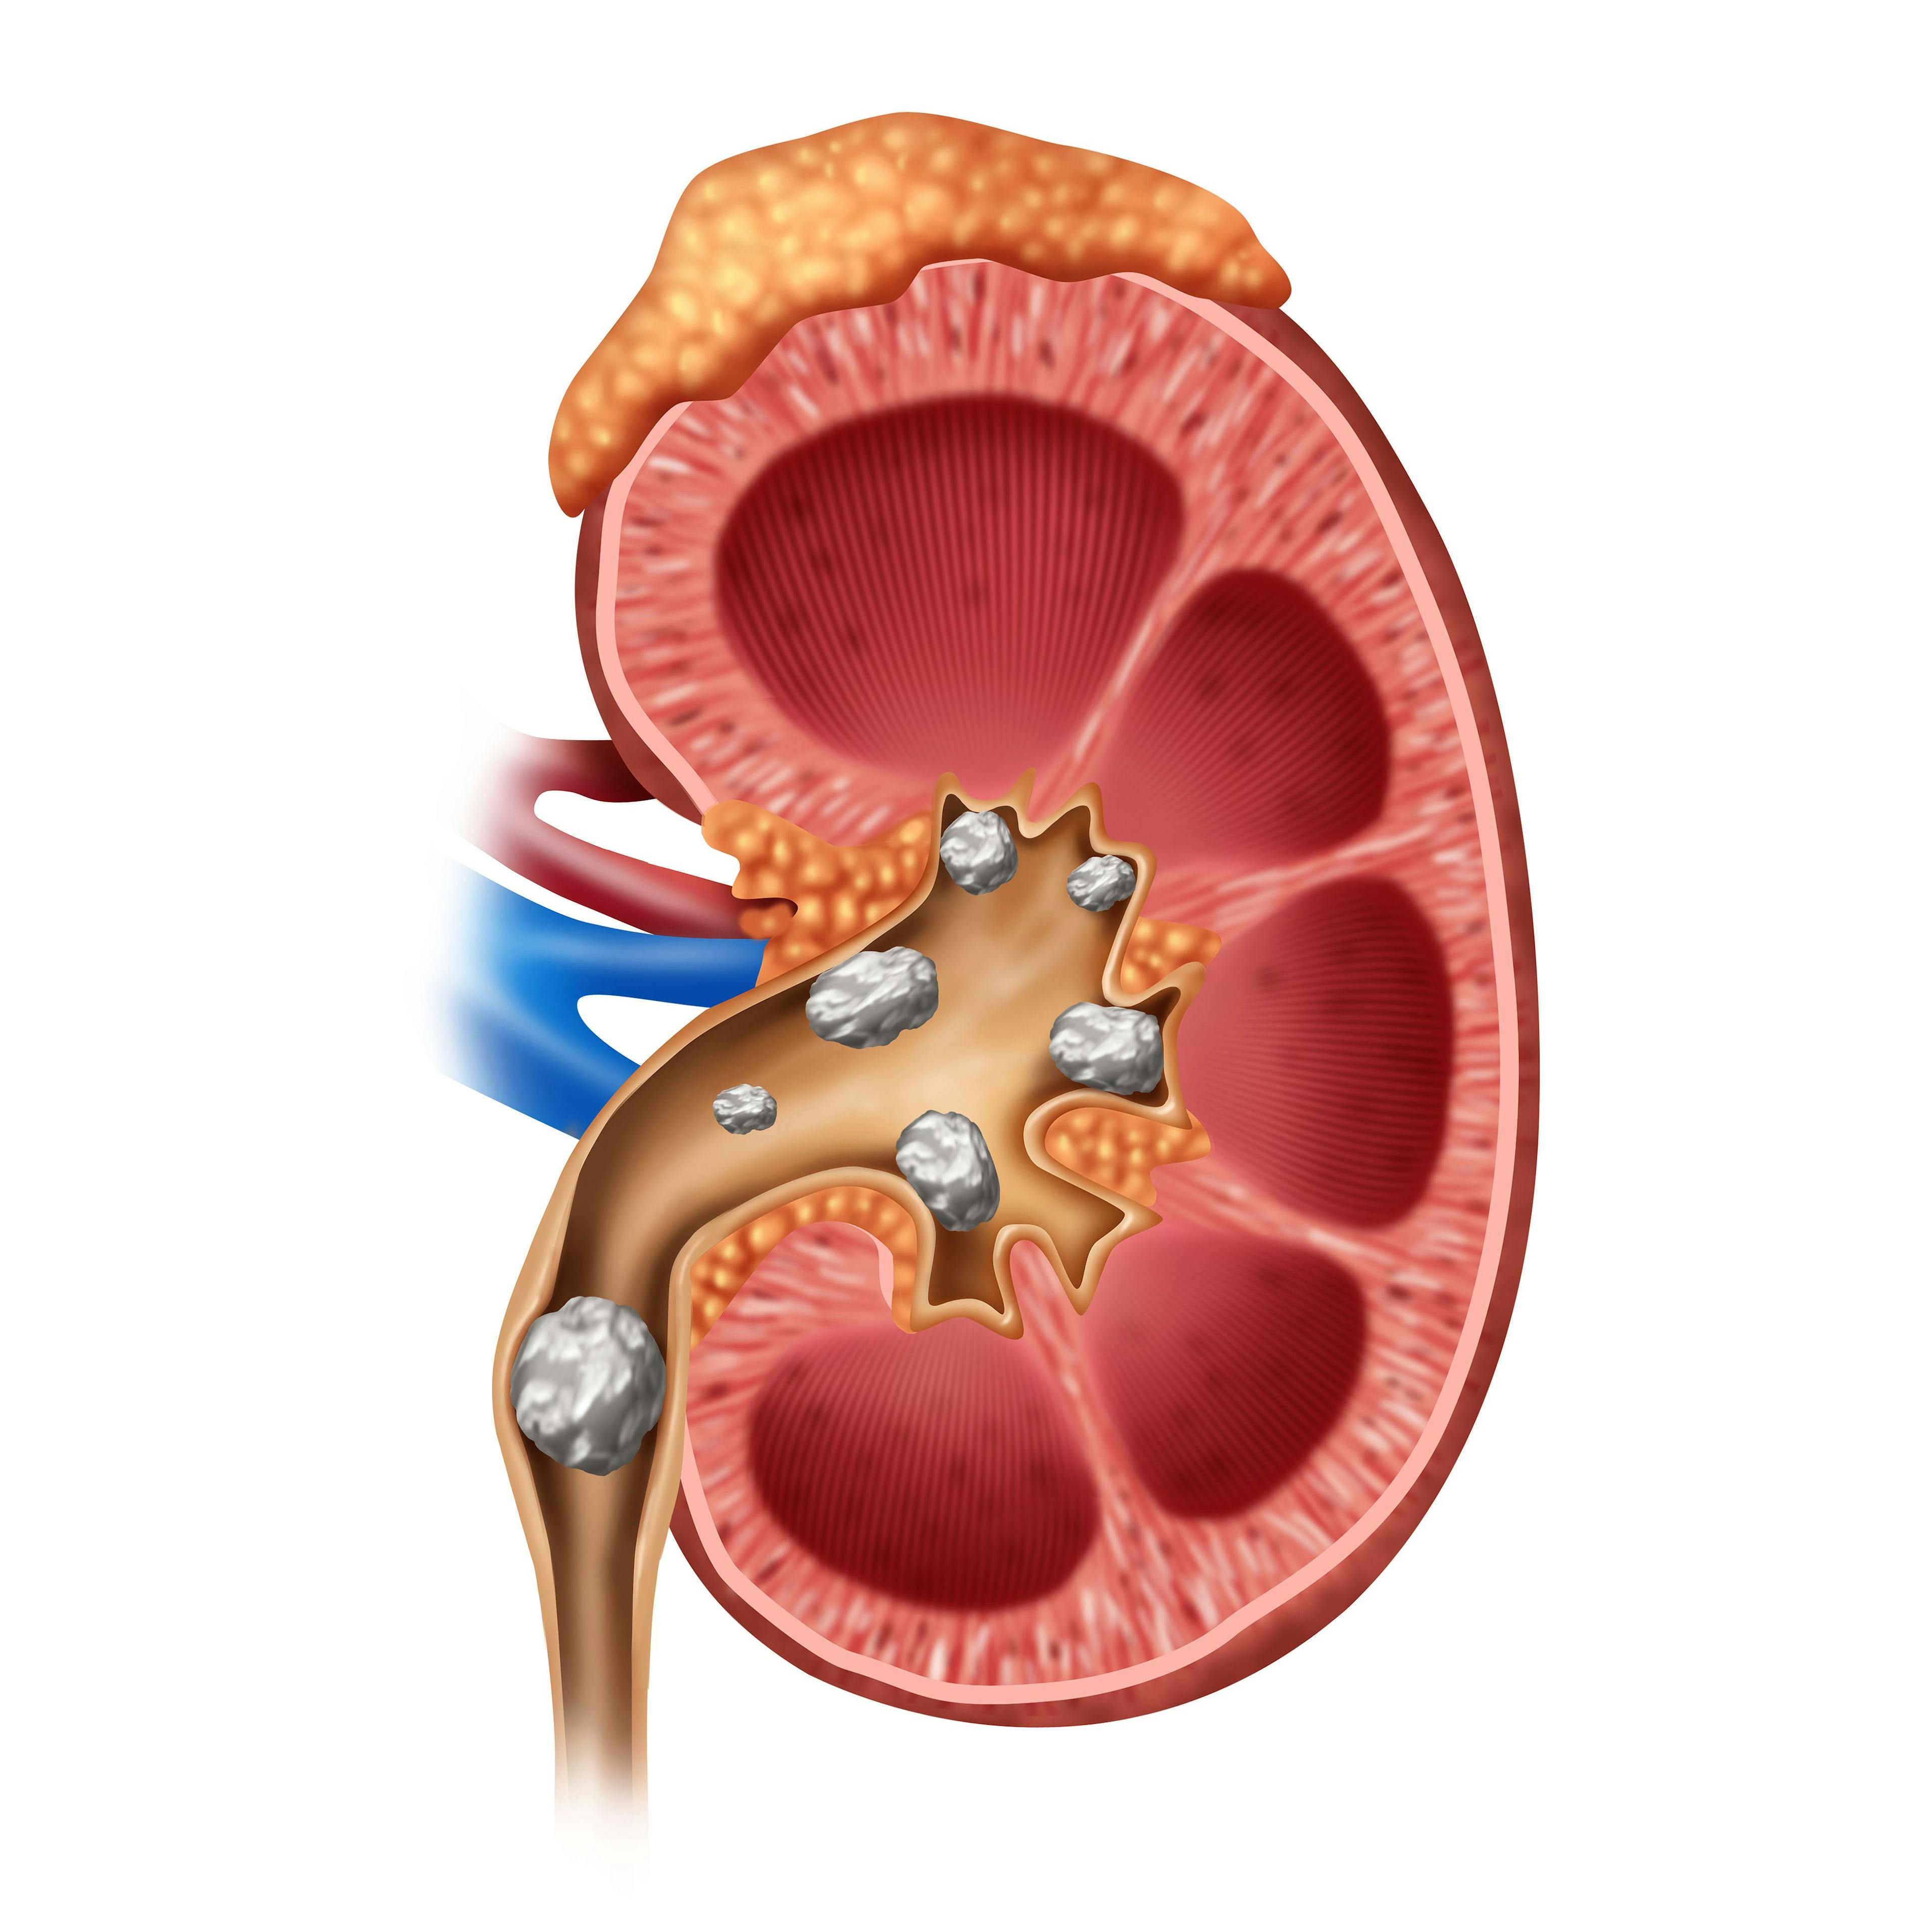 kidney picture